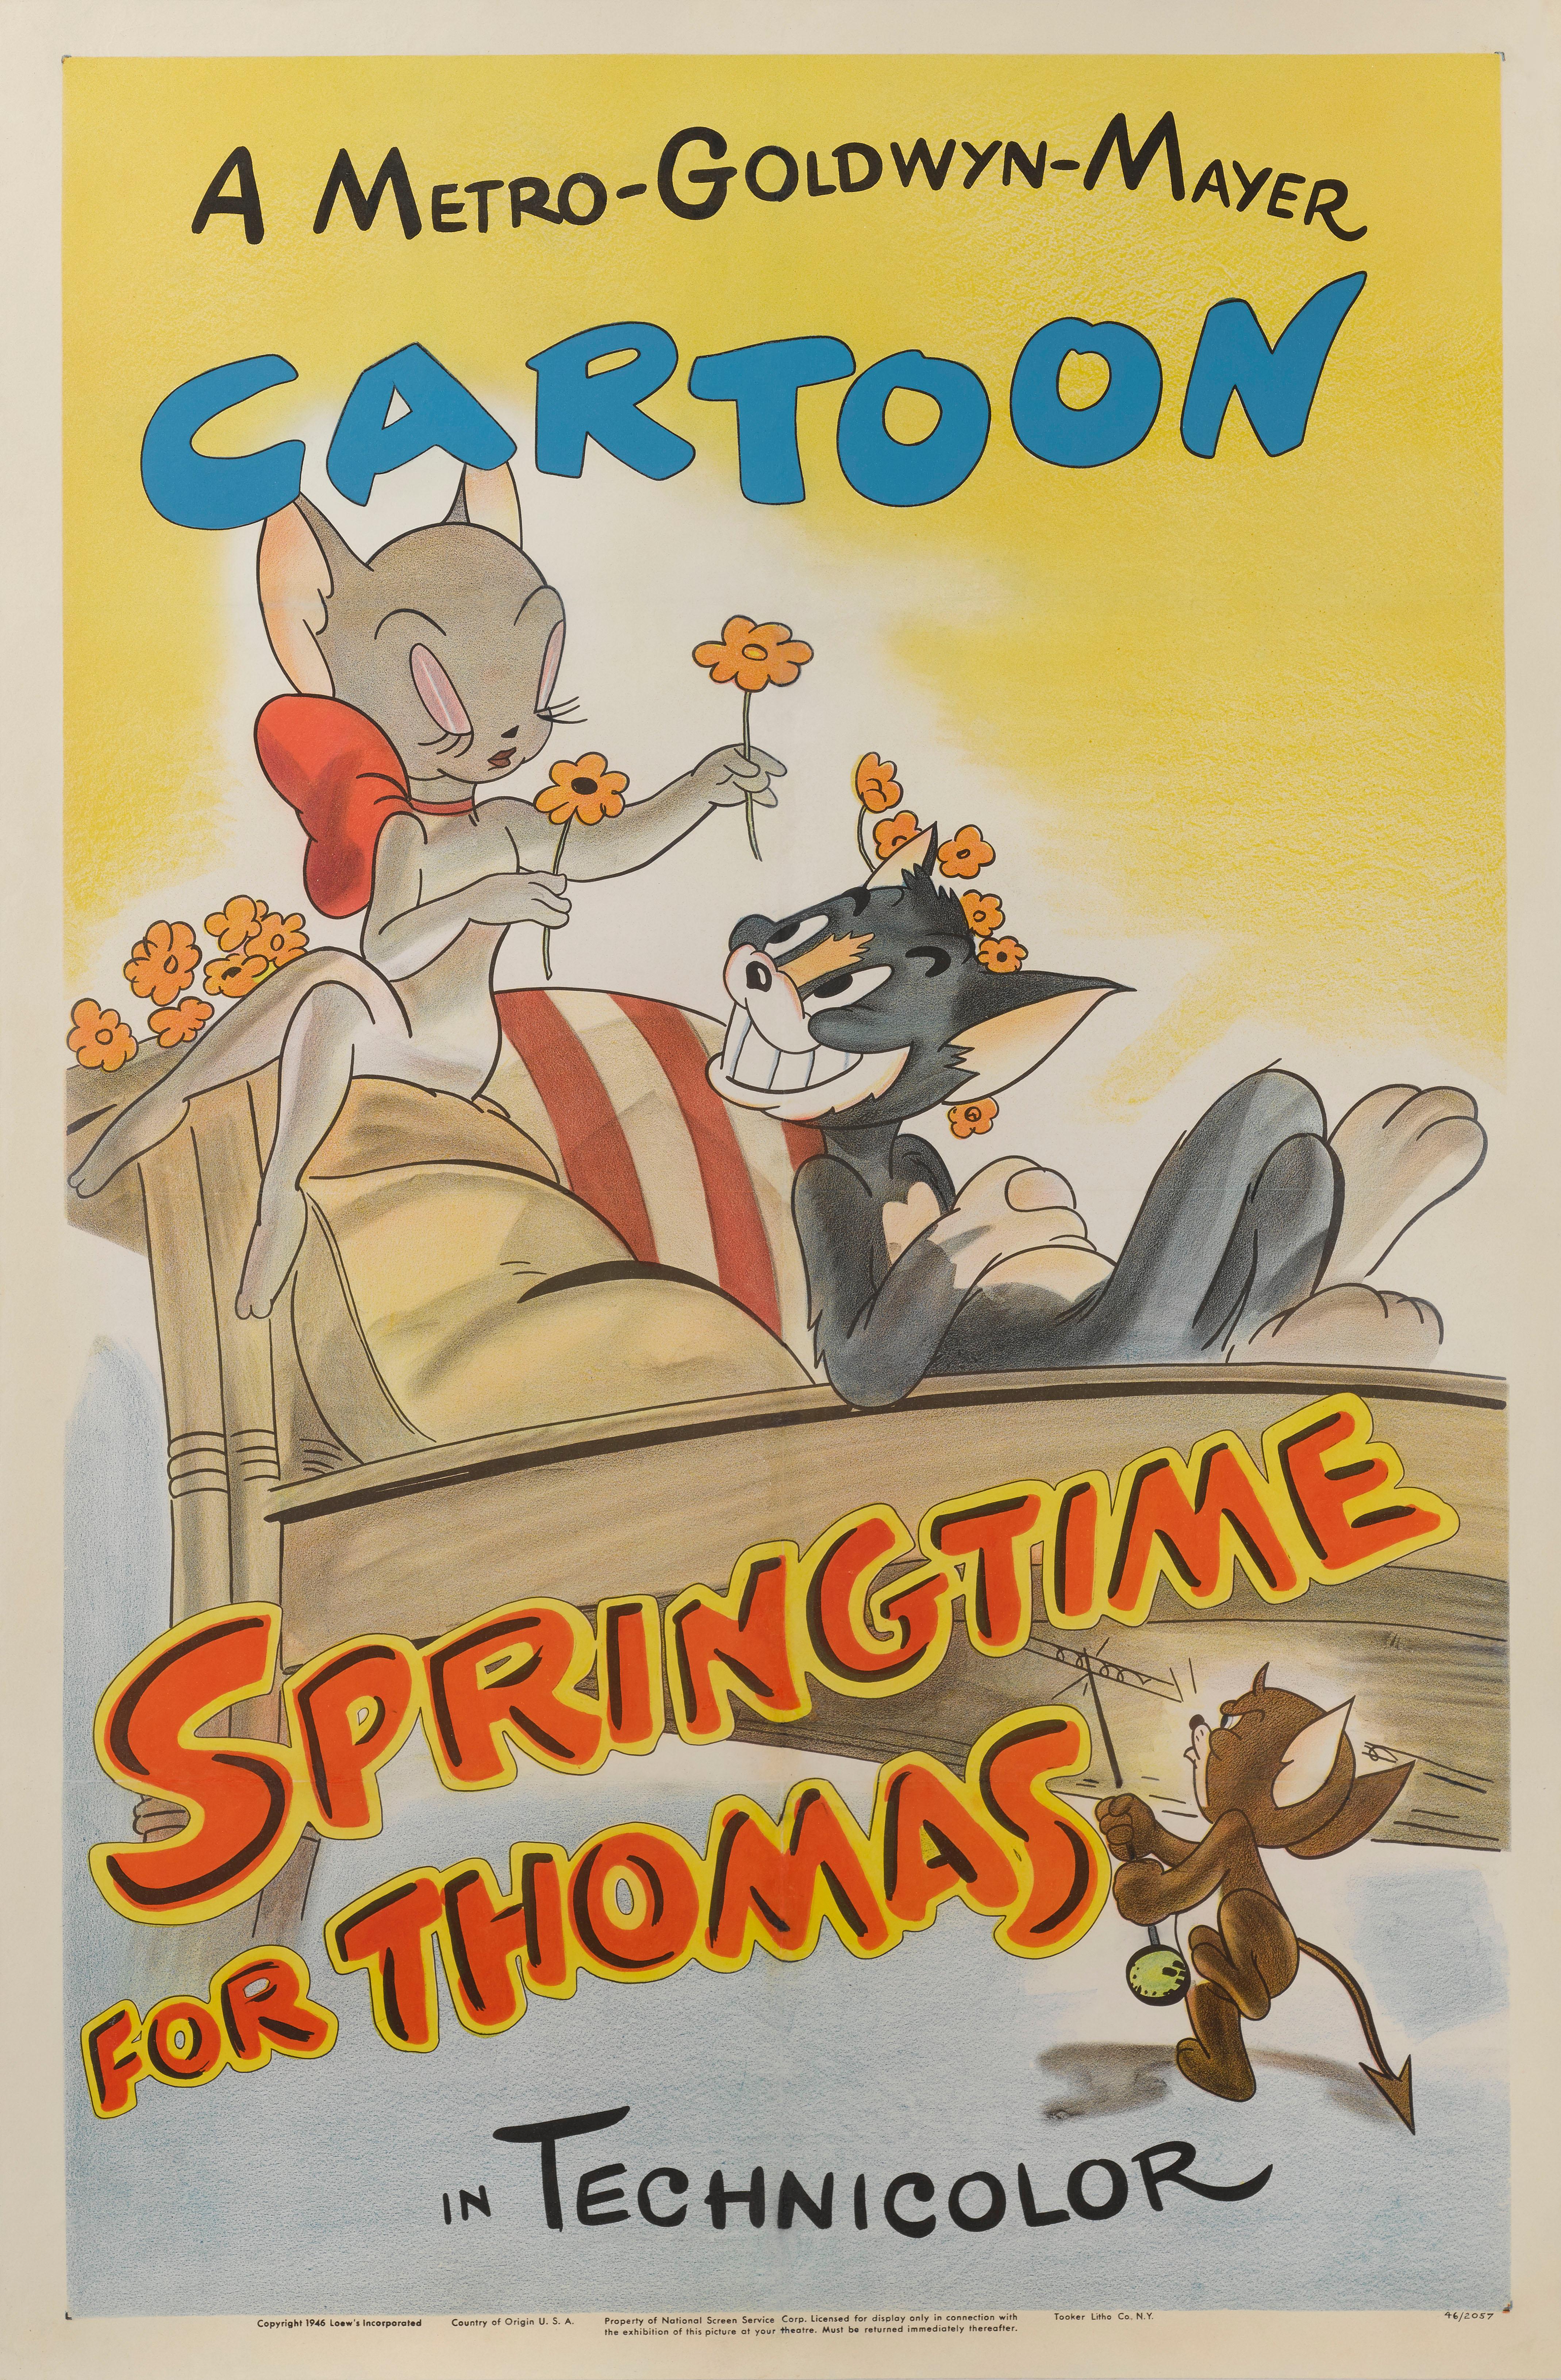 Original US film poster for Springtime for Thomas (1946)
This seven minute cartoon would have been shown before the main feature at the cinema. Tom and Jerry cartoons were extremely popular, and in the 40s nearly fifty of these shorts were